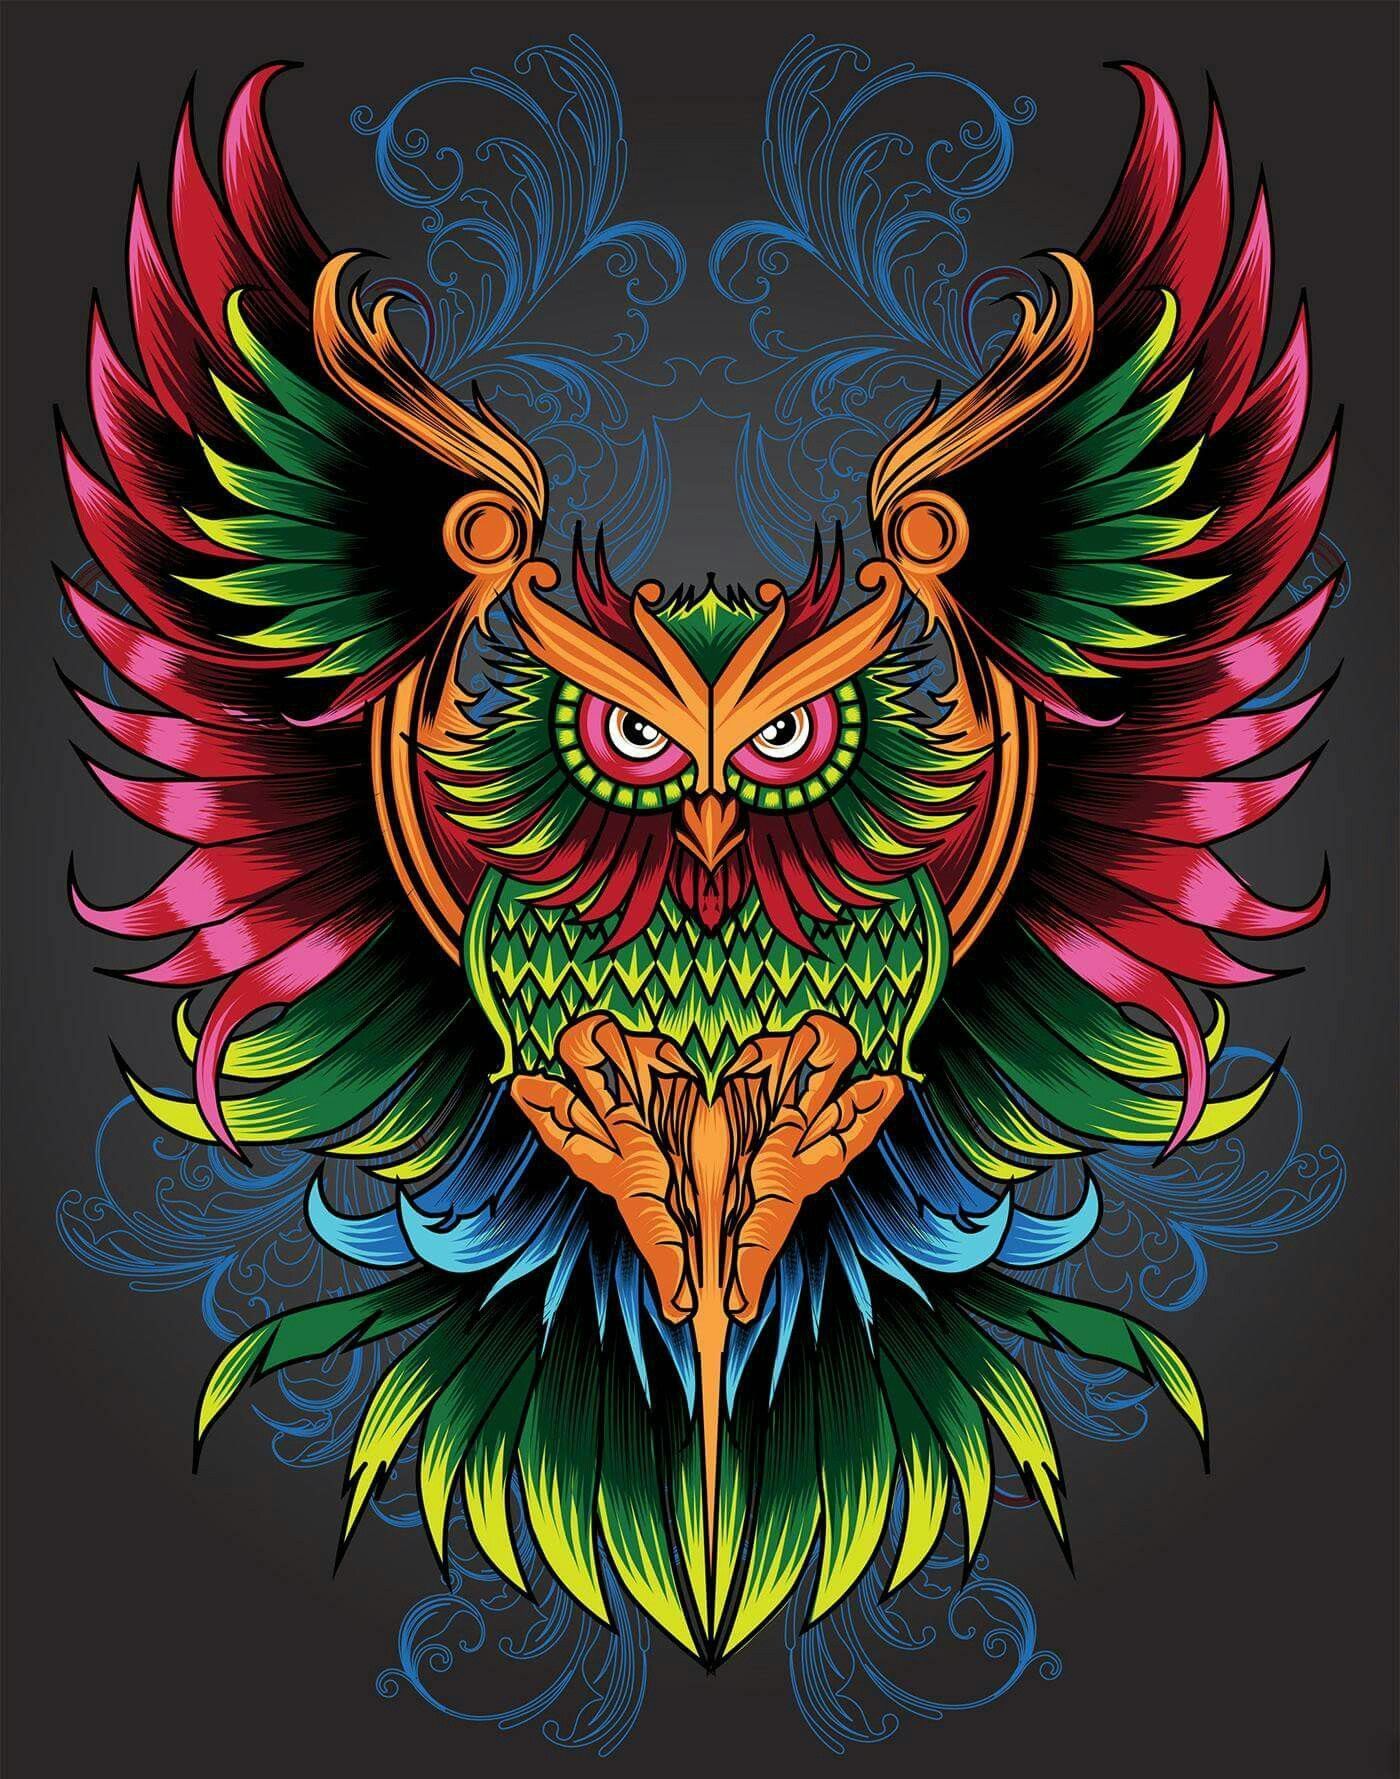 Colorful Owl Wallpaper Free Colorful Owl Background